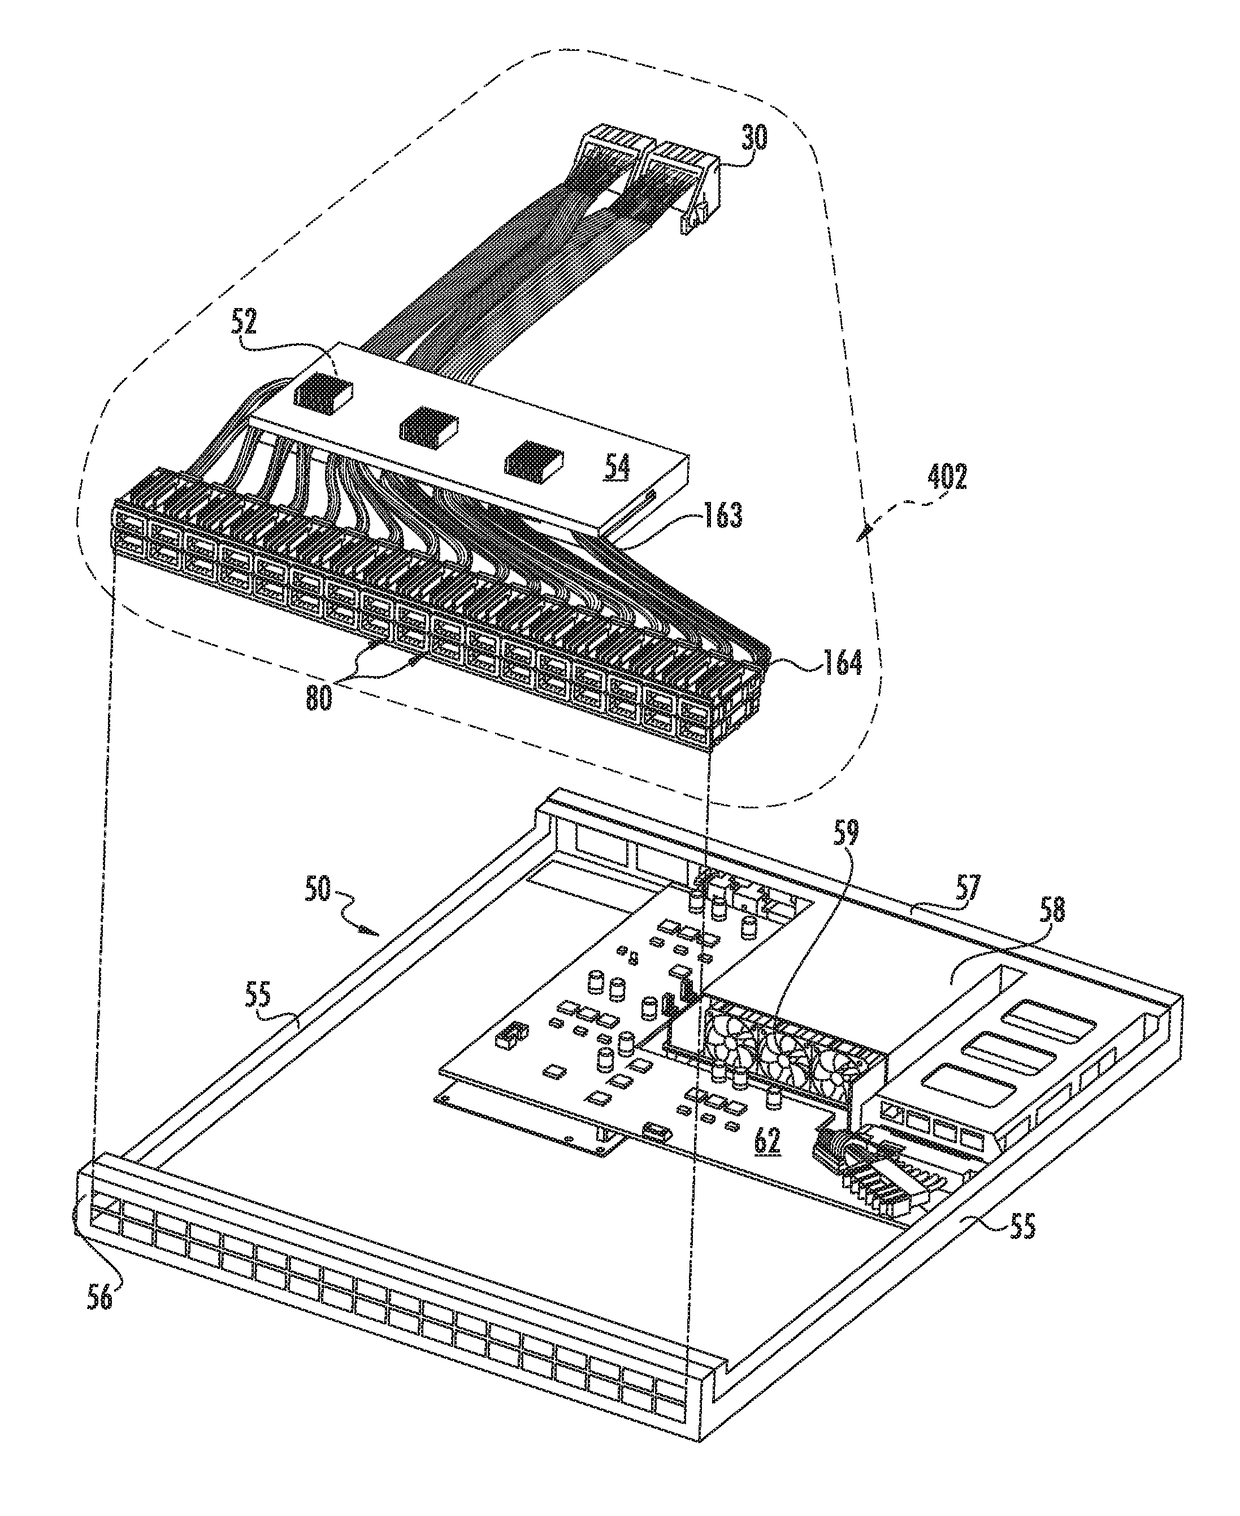 Circuit board bypass assemblies and components therefor